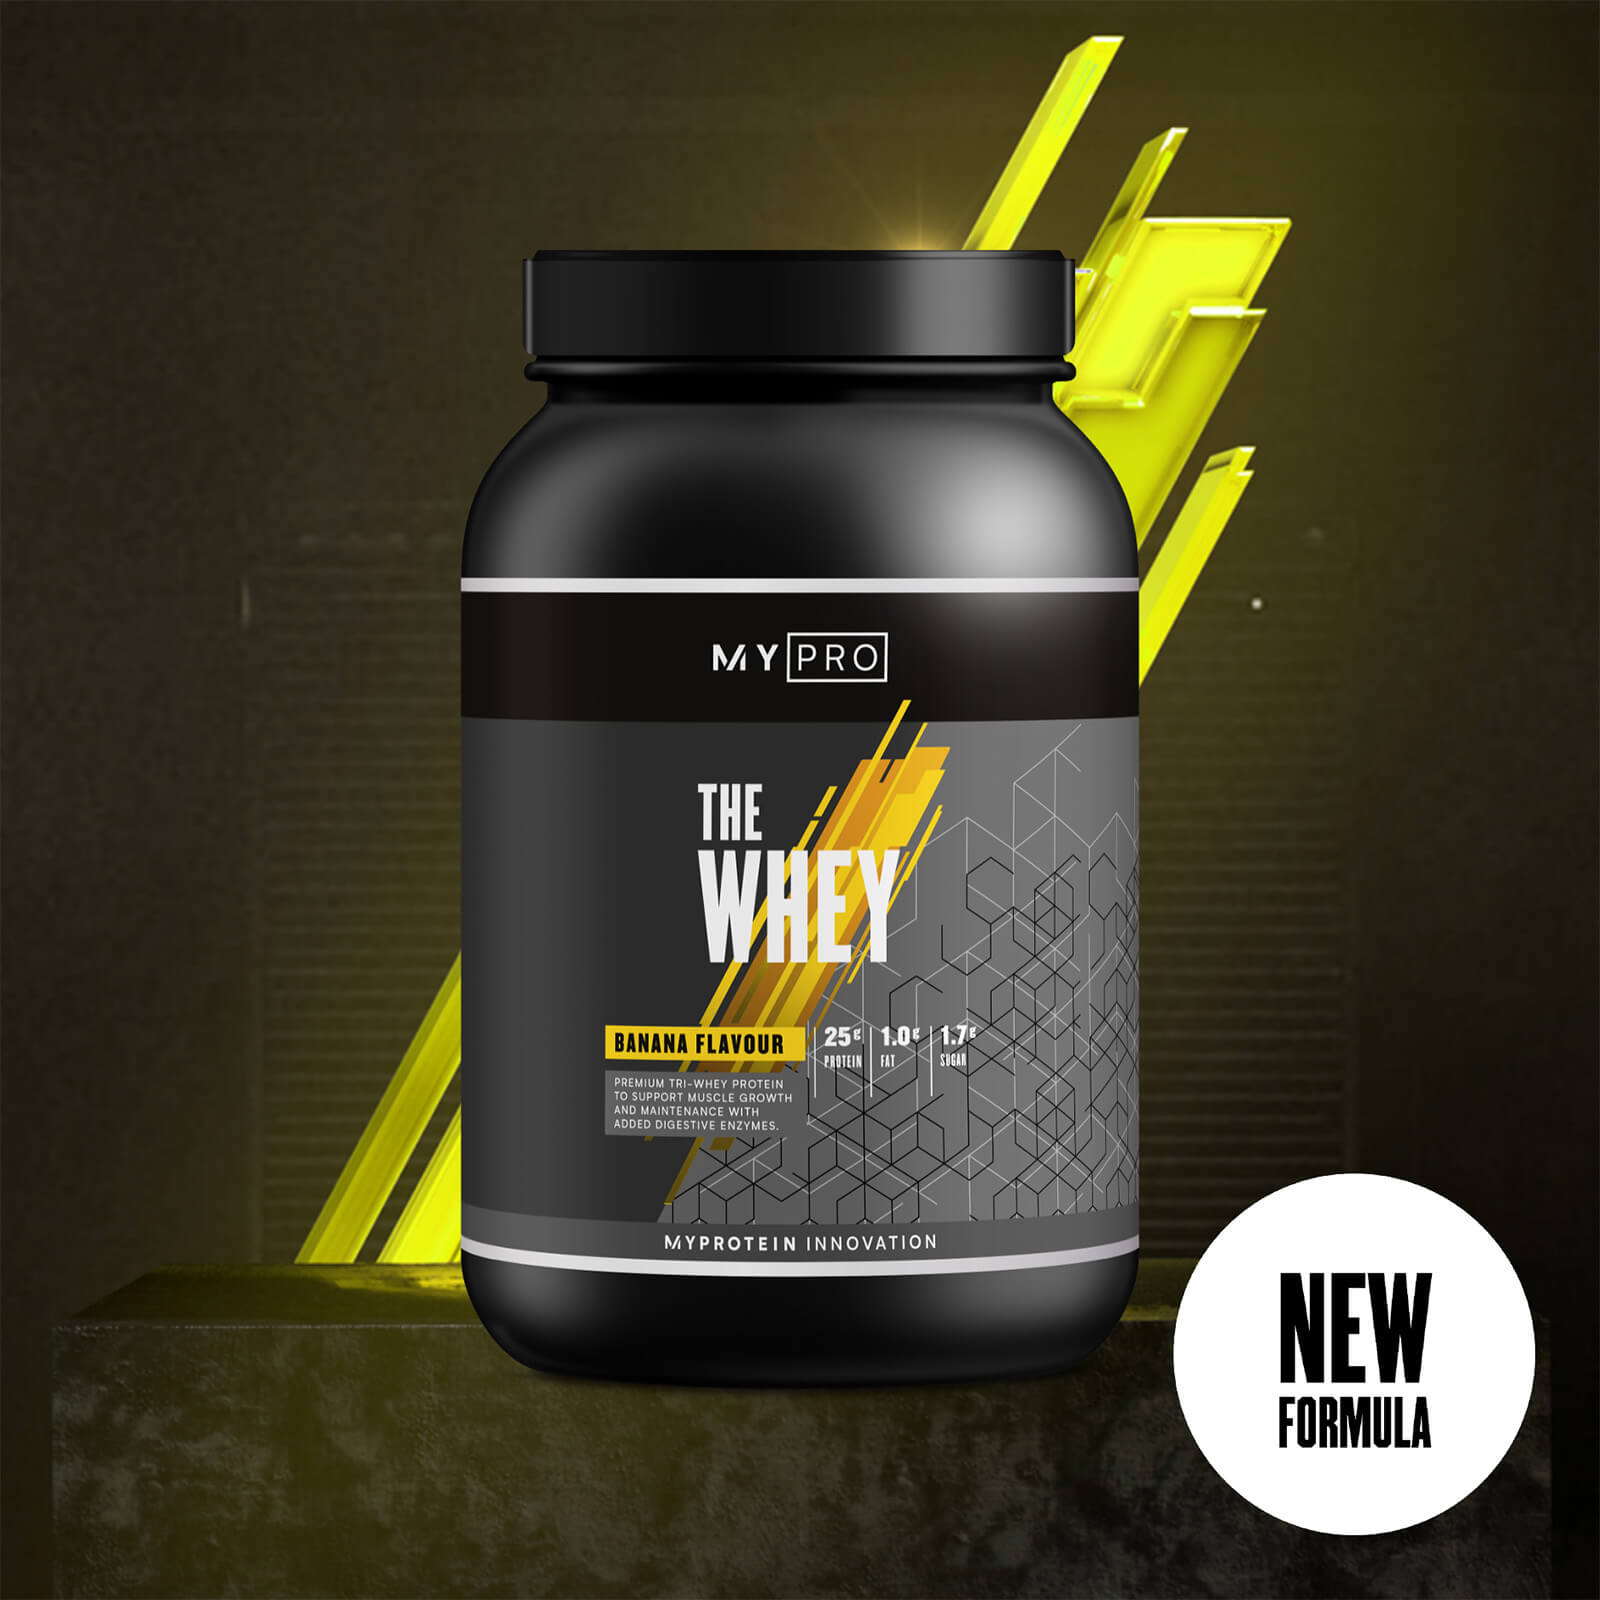 Myprotein THE Whey - 30servings - Banana